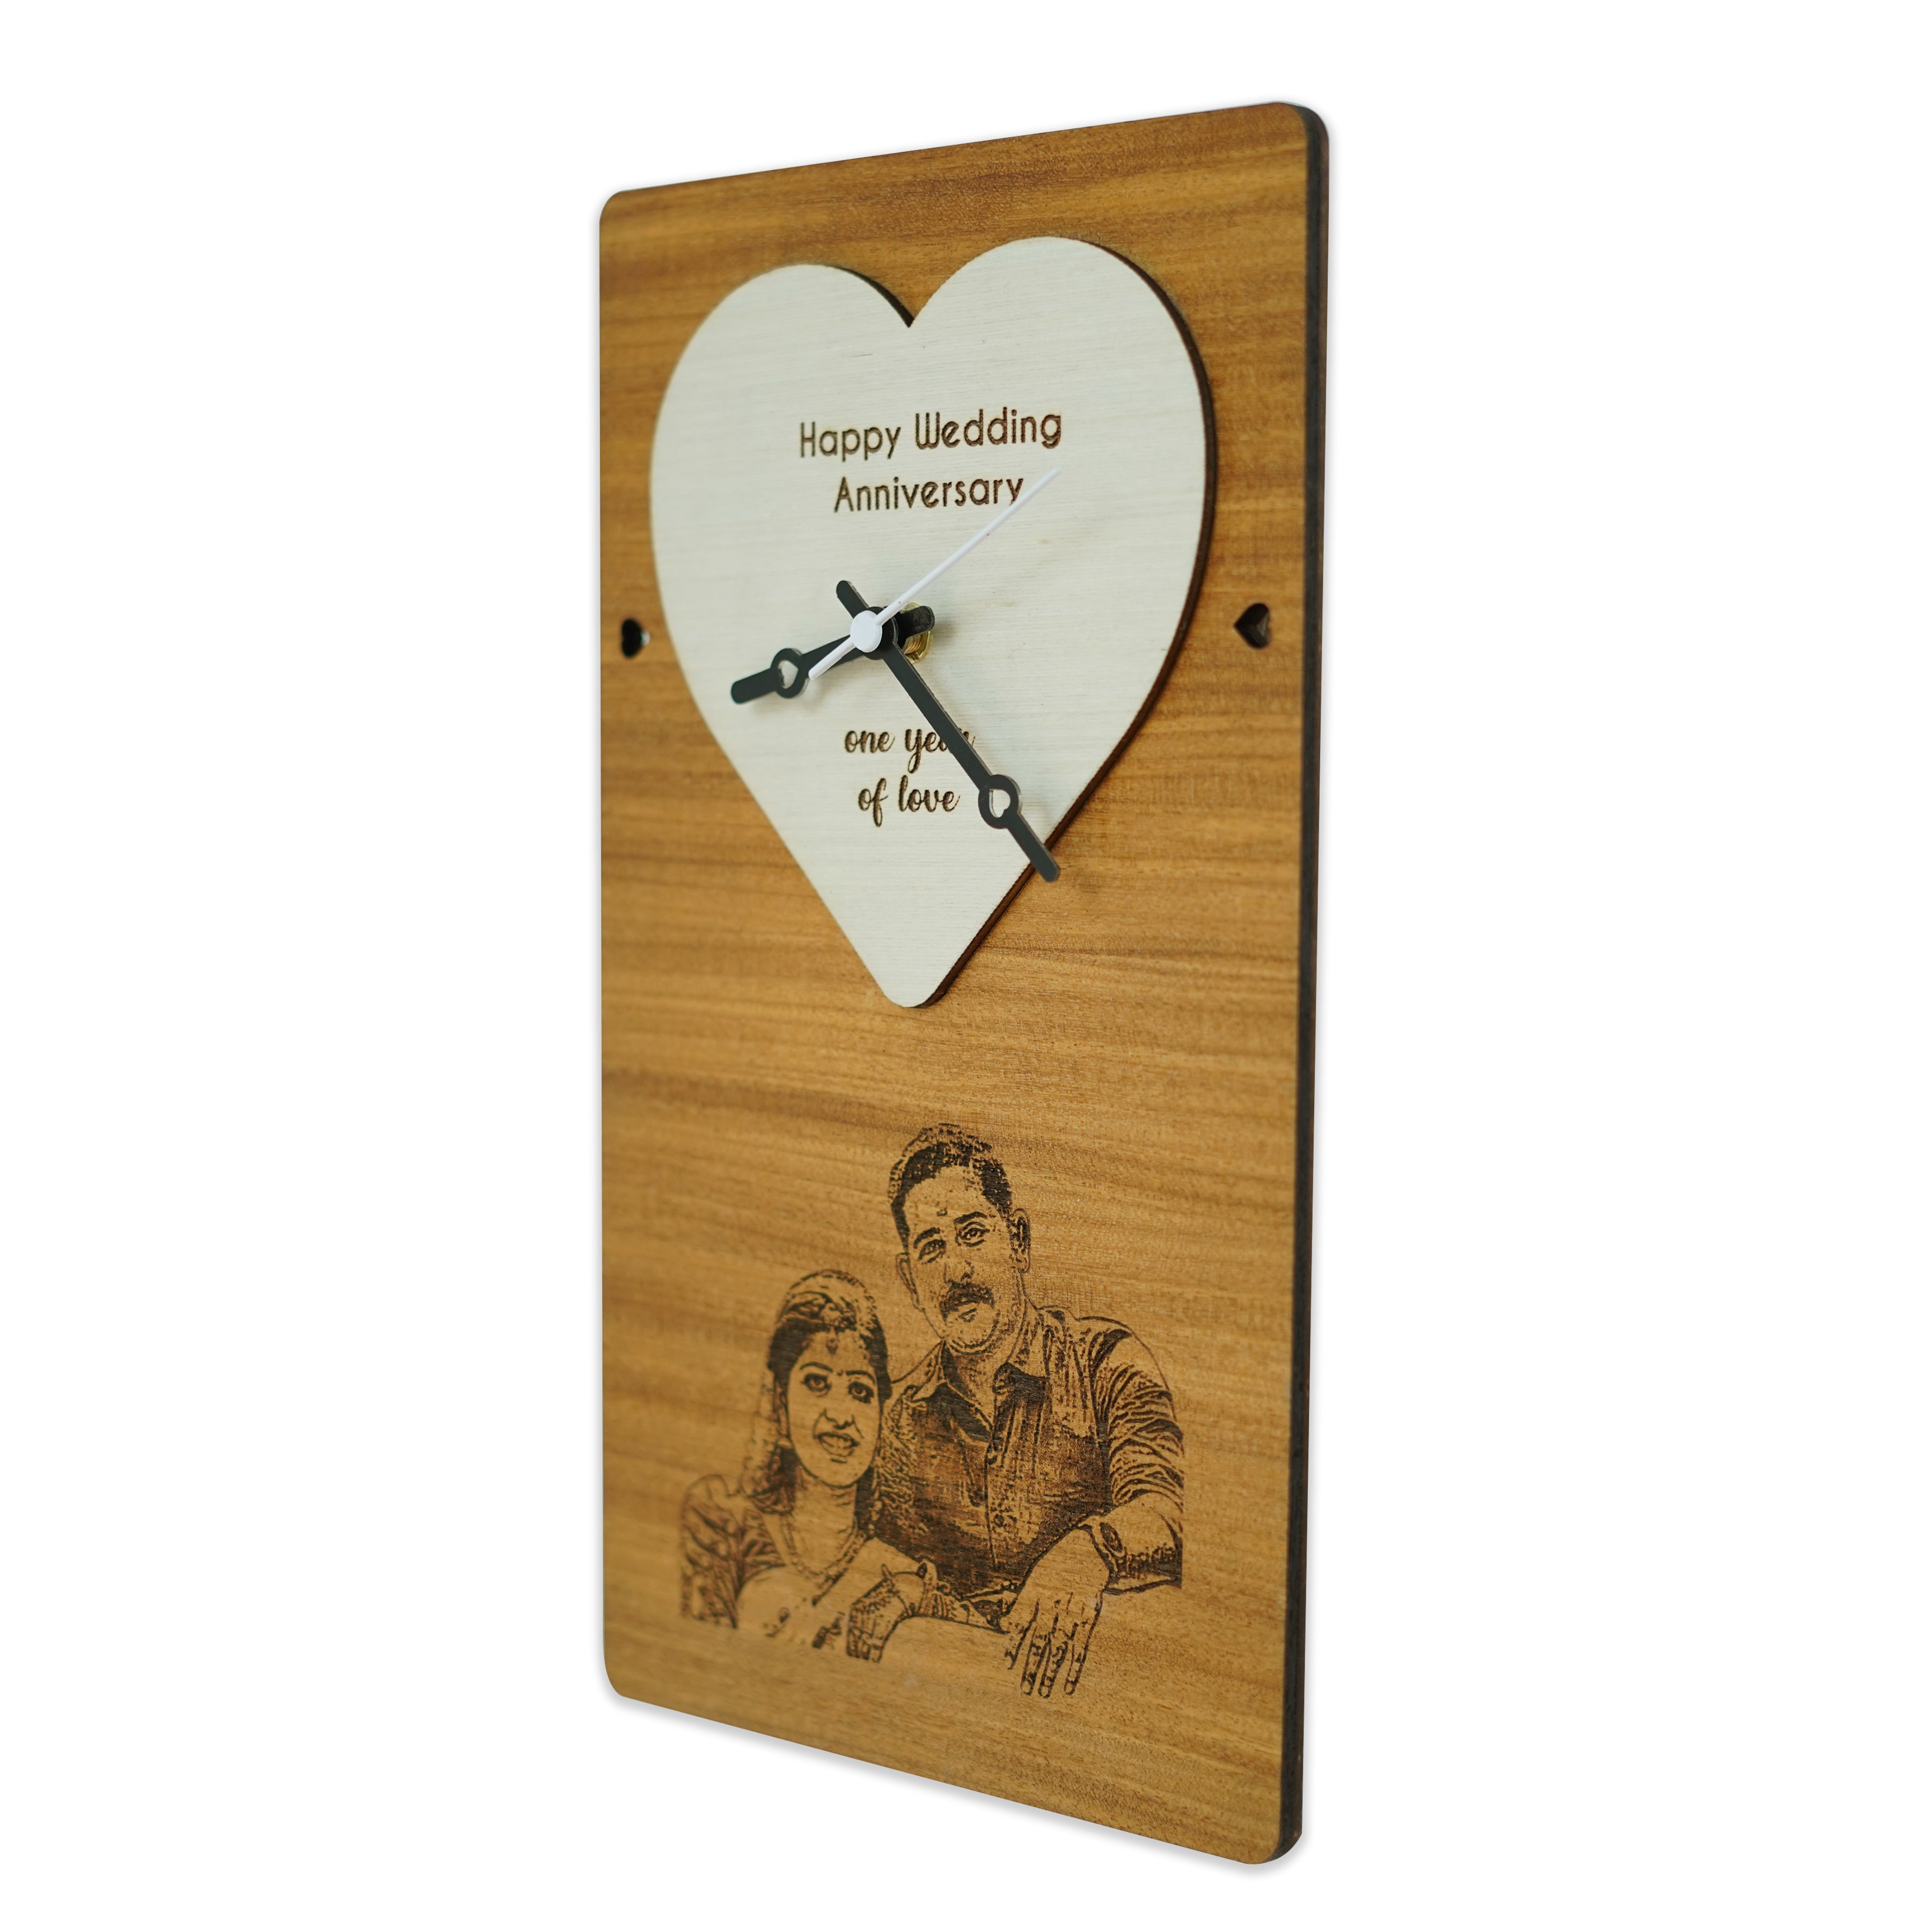 Photo Engraved Personalized Wooden Wall Clock Gift – Picloon